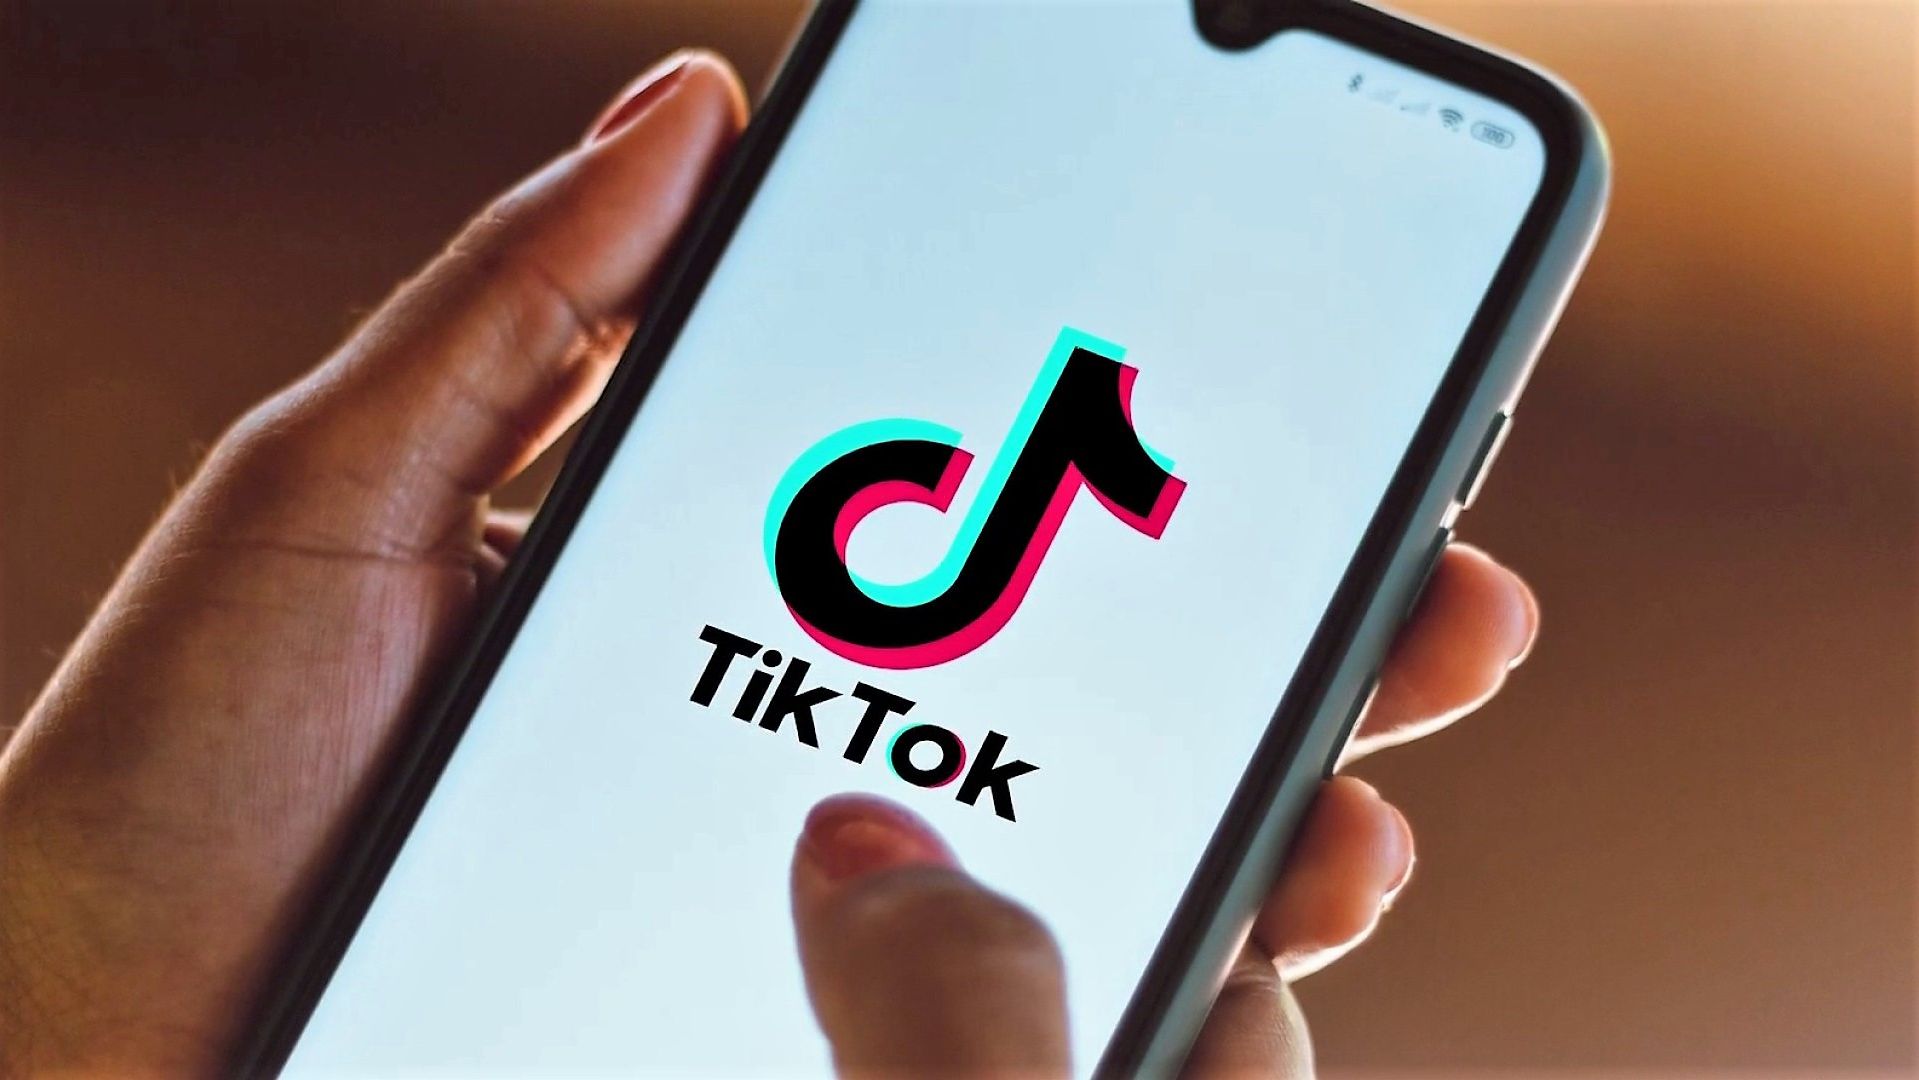 Sumber: https://stealthoptional.com/how-to/how-to-green-screen-on-tiktok/